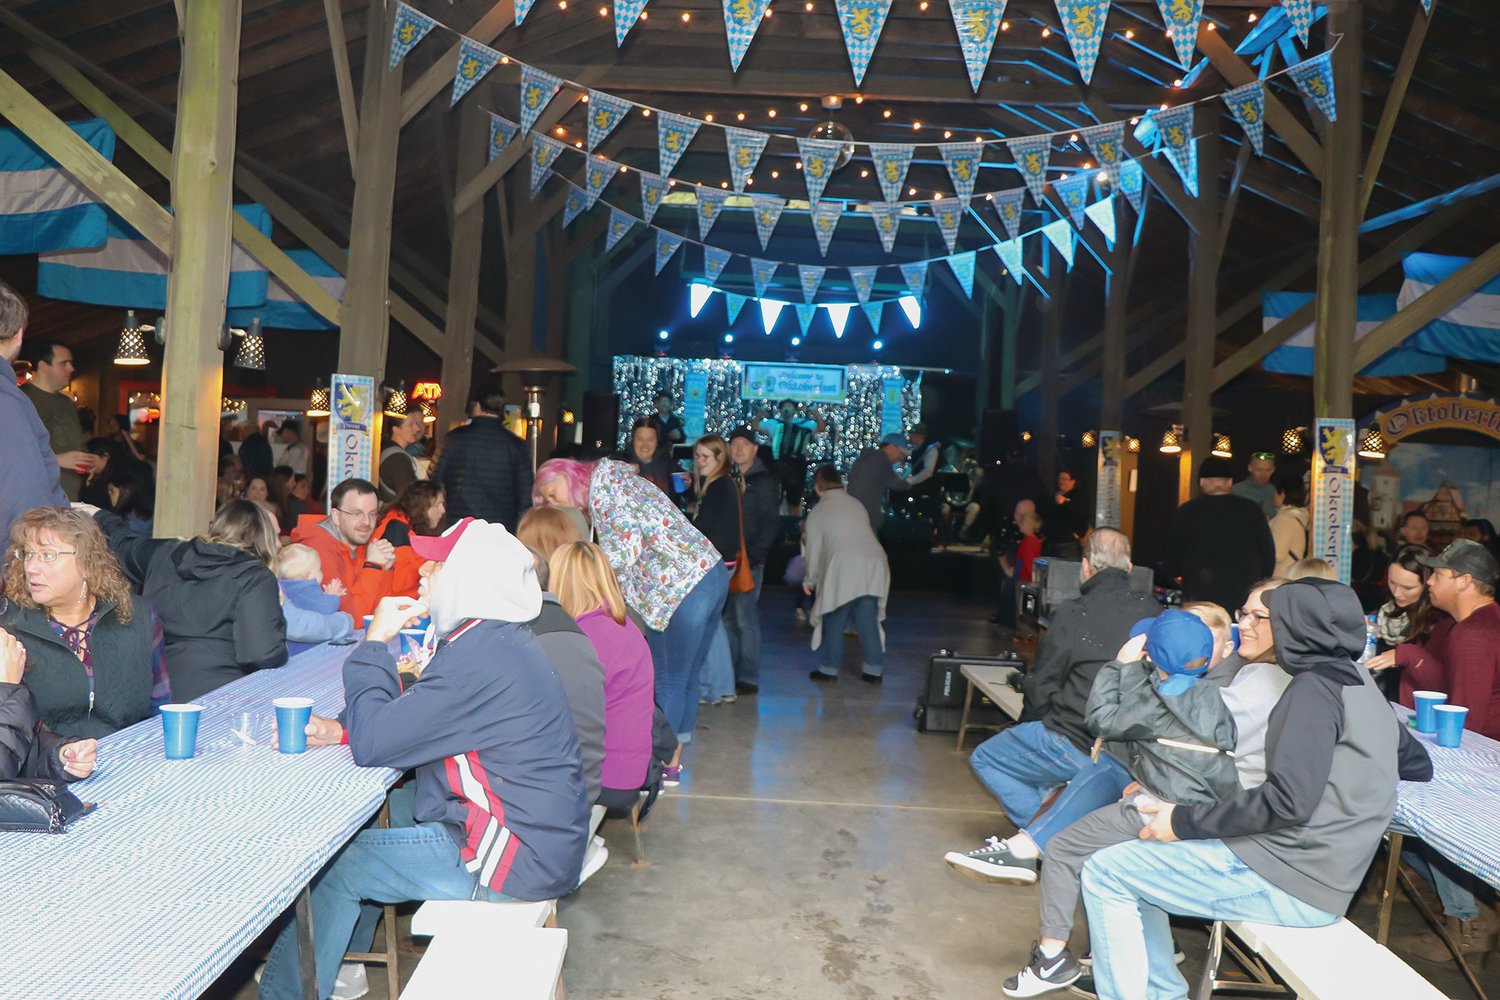 Families eat and drink at a previous Oktoberfest as the Smilin’ Scandinavians play.